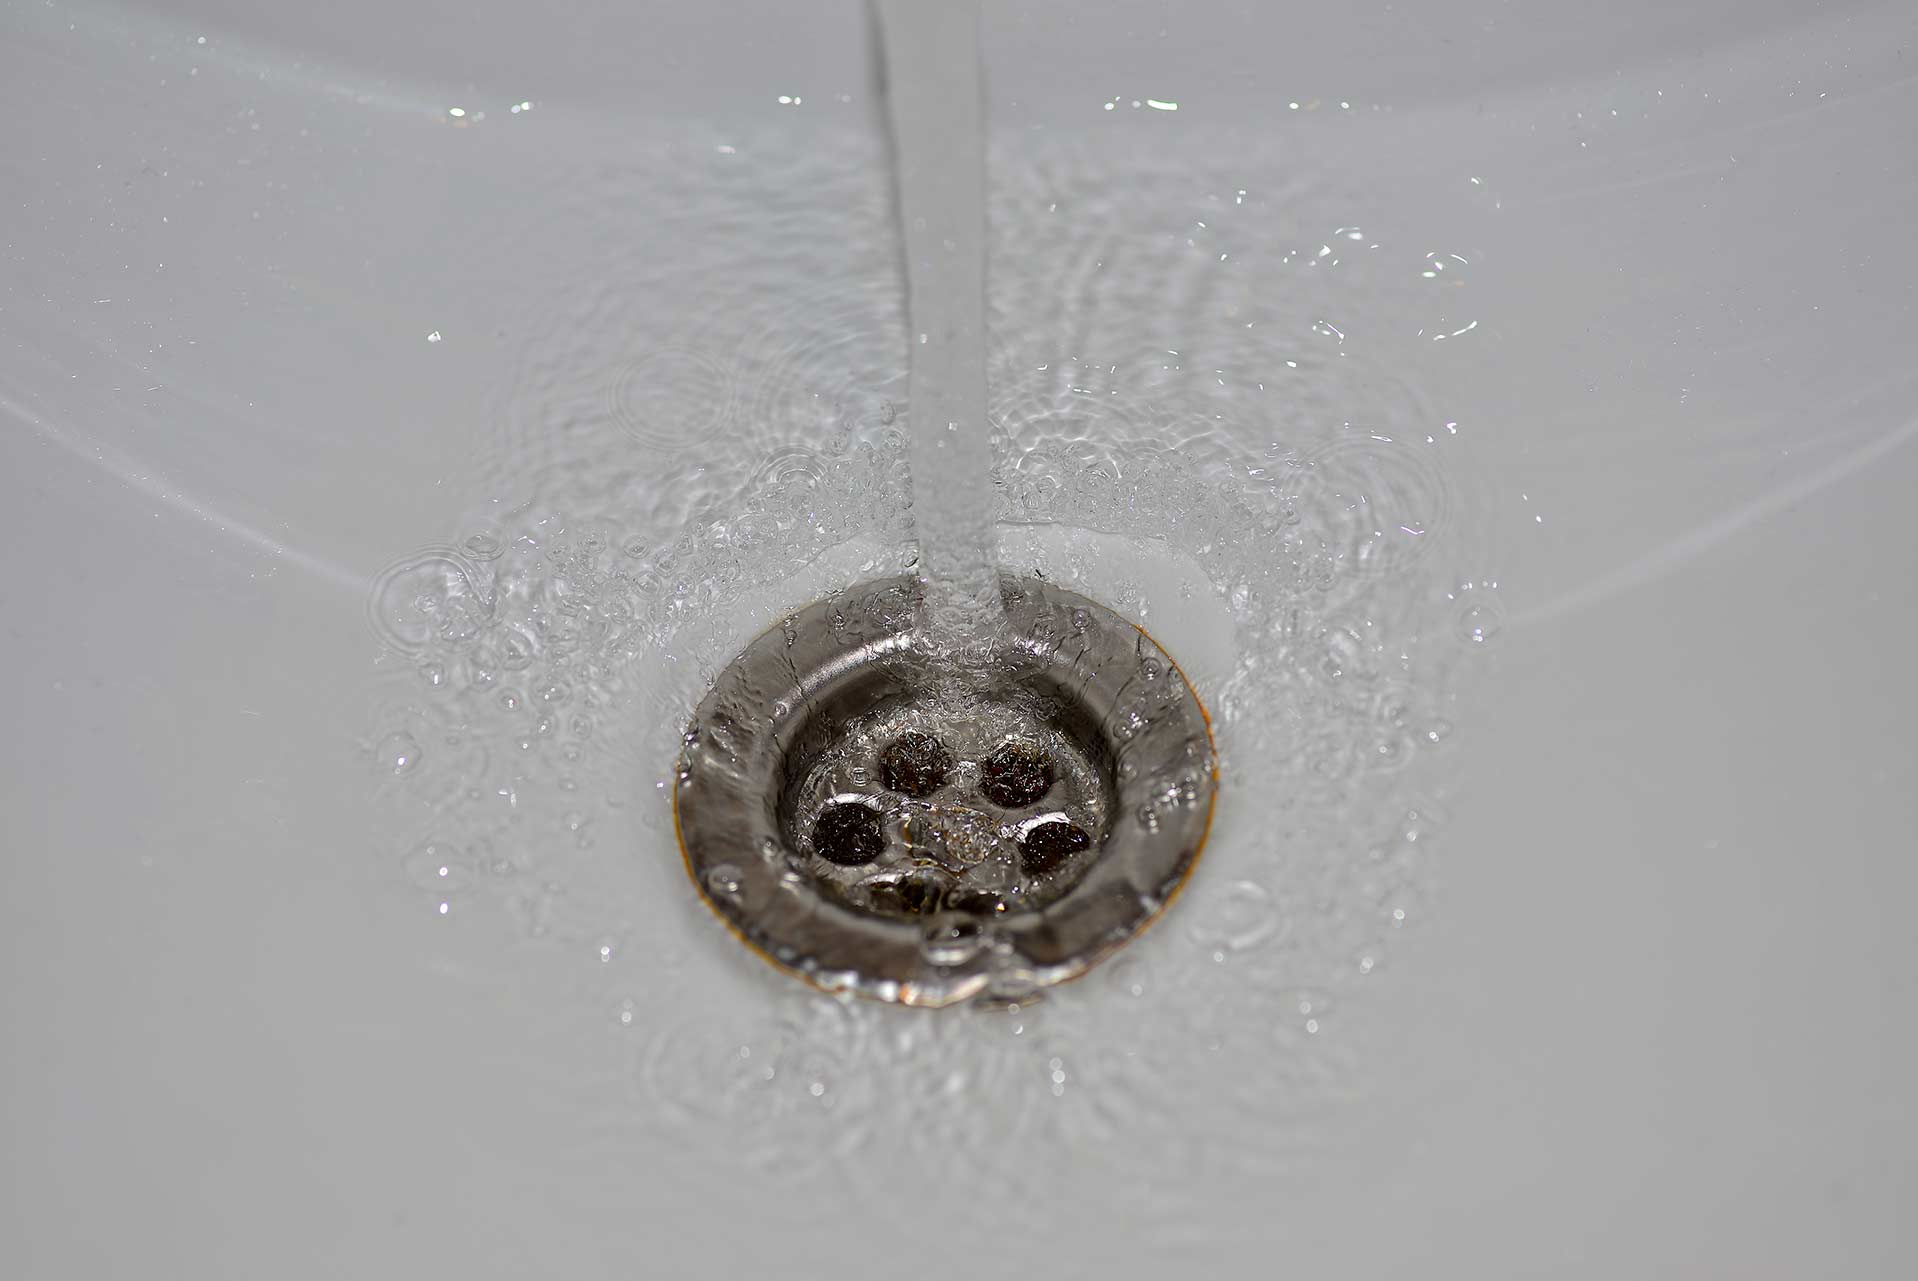 A2B Drains provides services to unblock blocked sinks and drains for properties in Twickenham.